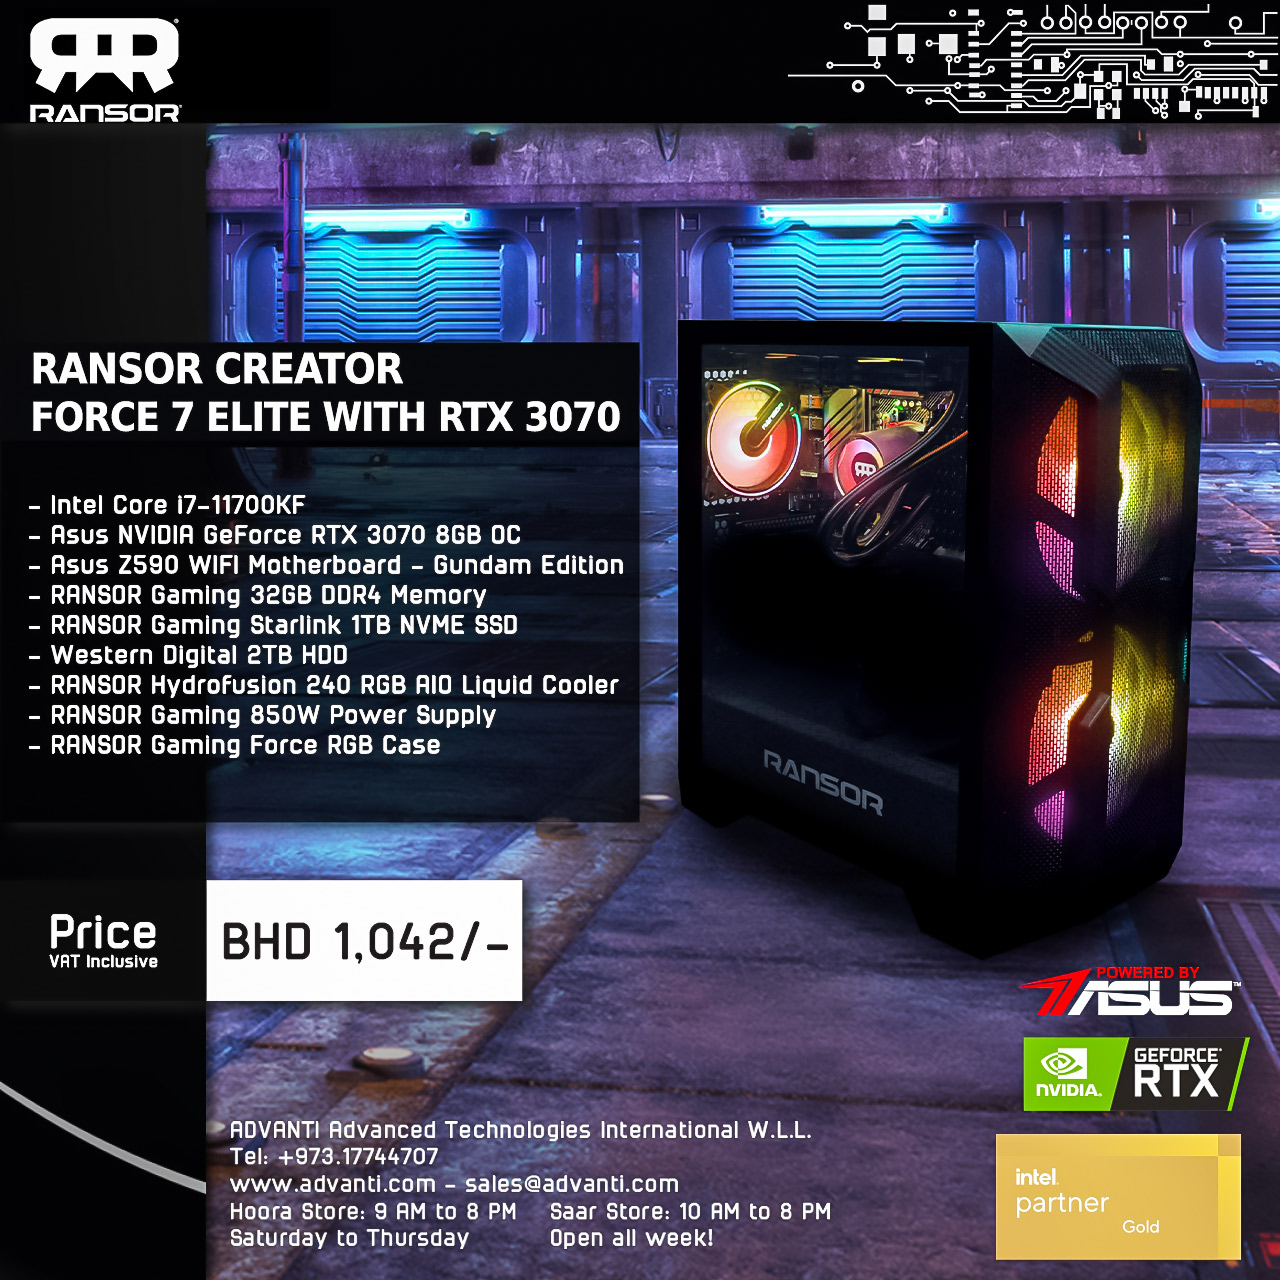 ransor-gaming-force-7-elite-with-rtx-307